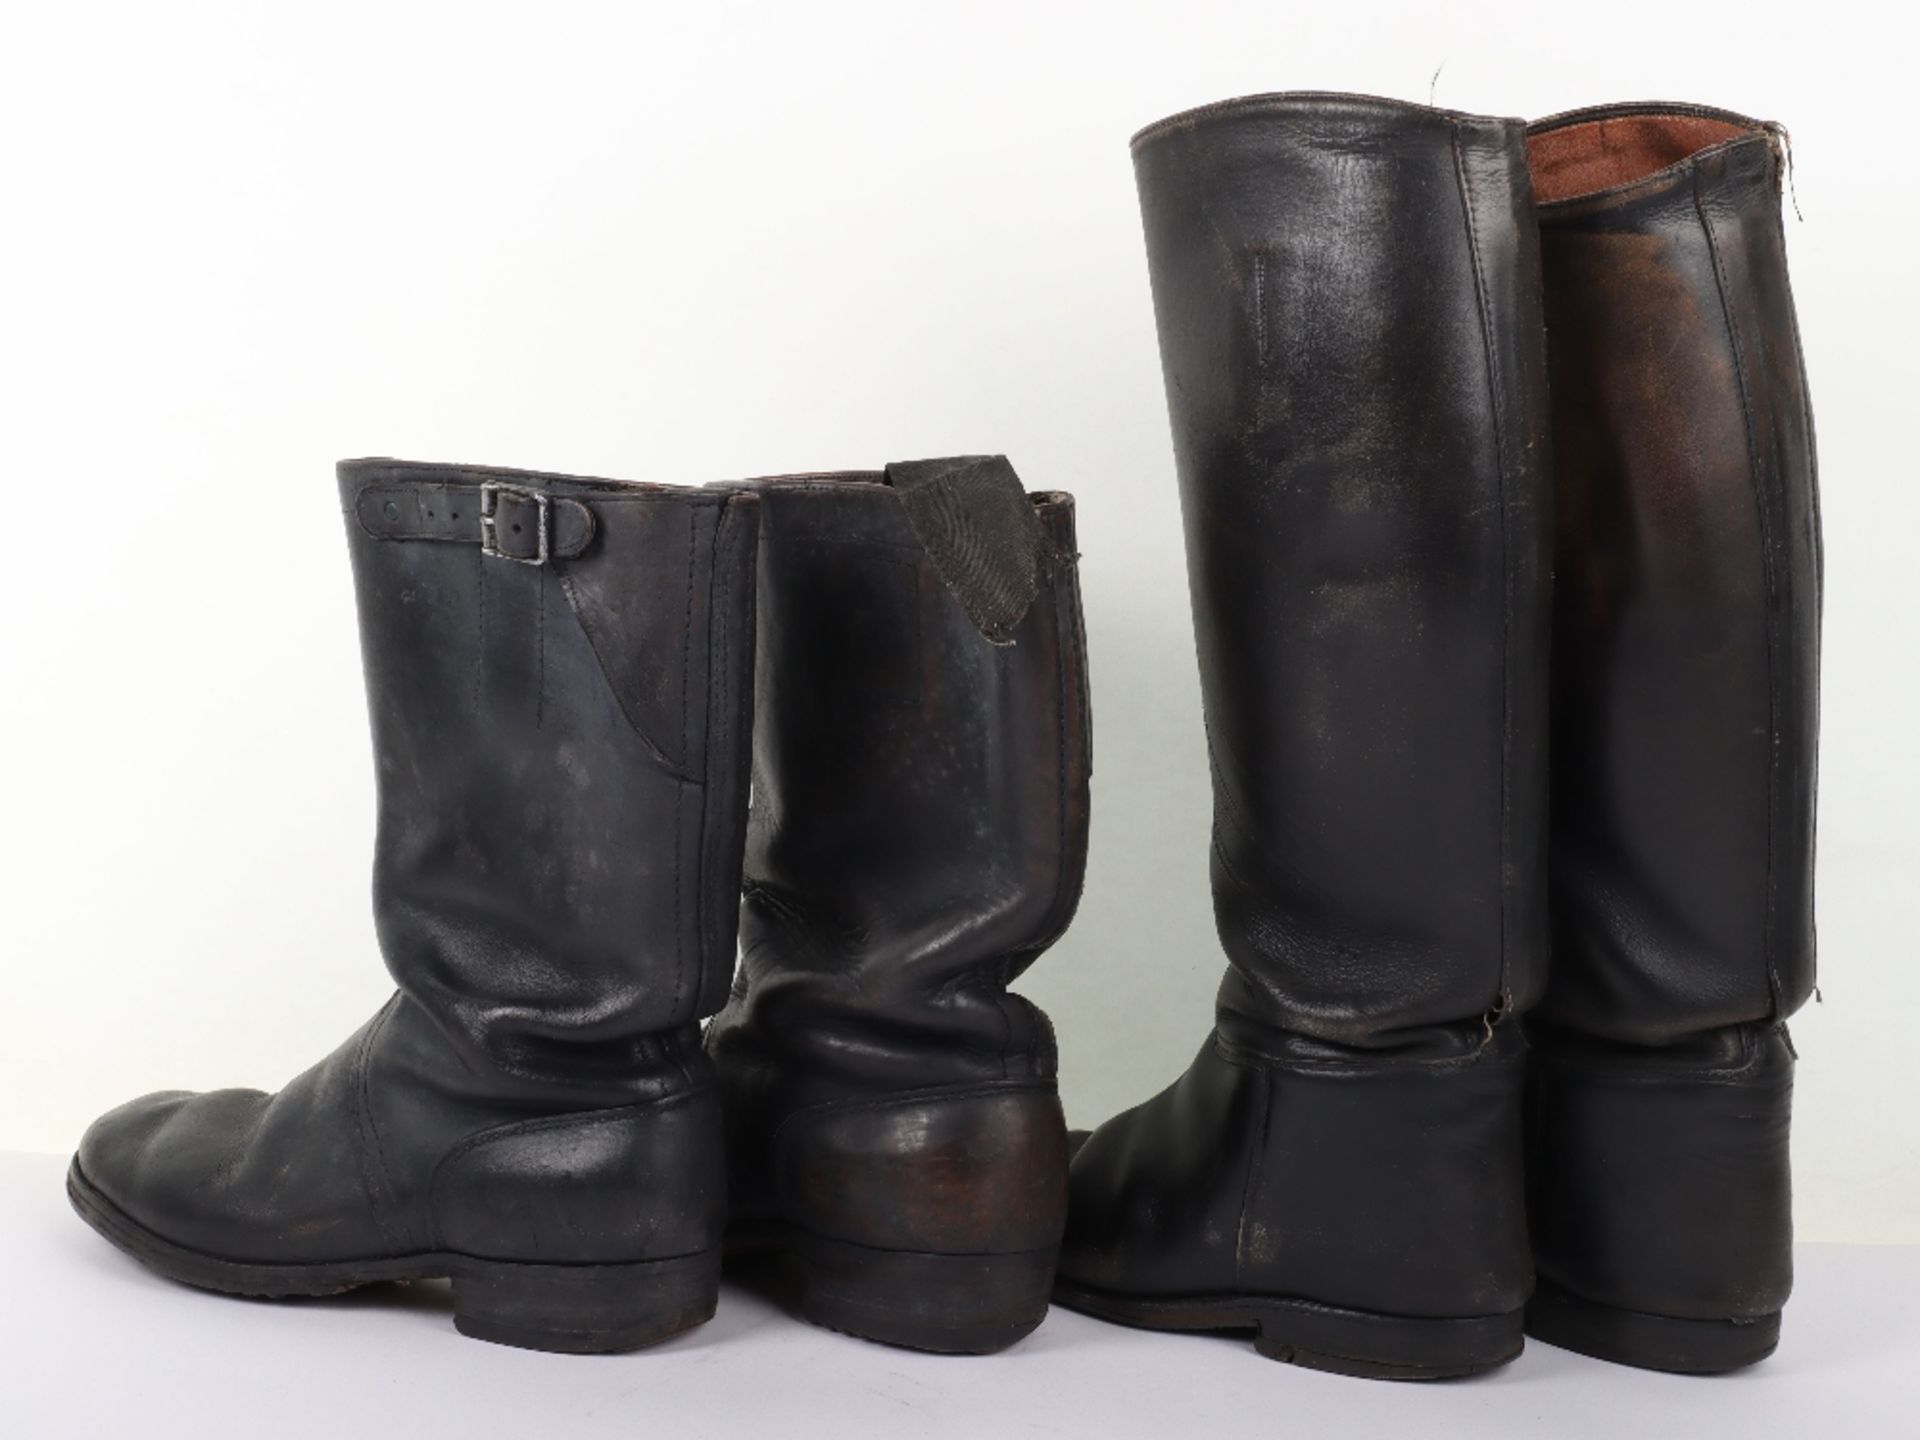 Pair of WW2 Style German Black Leather Boots - Image 3 of 4